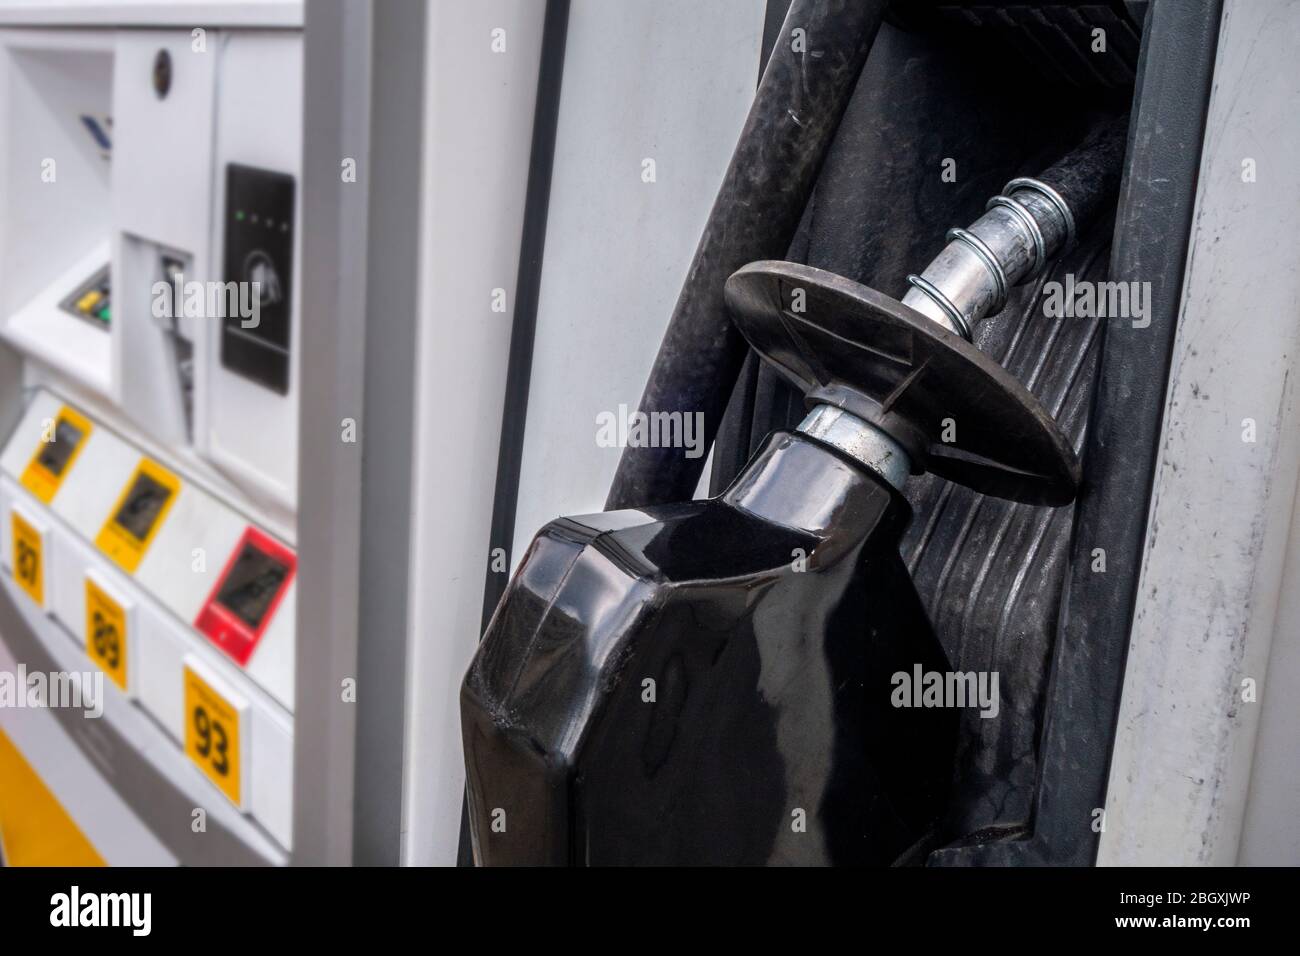 pump for refueling vehicle's gas tank Stock Photo